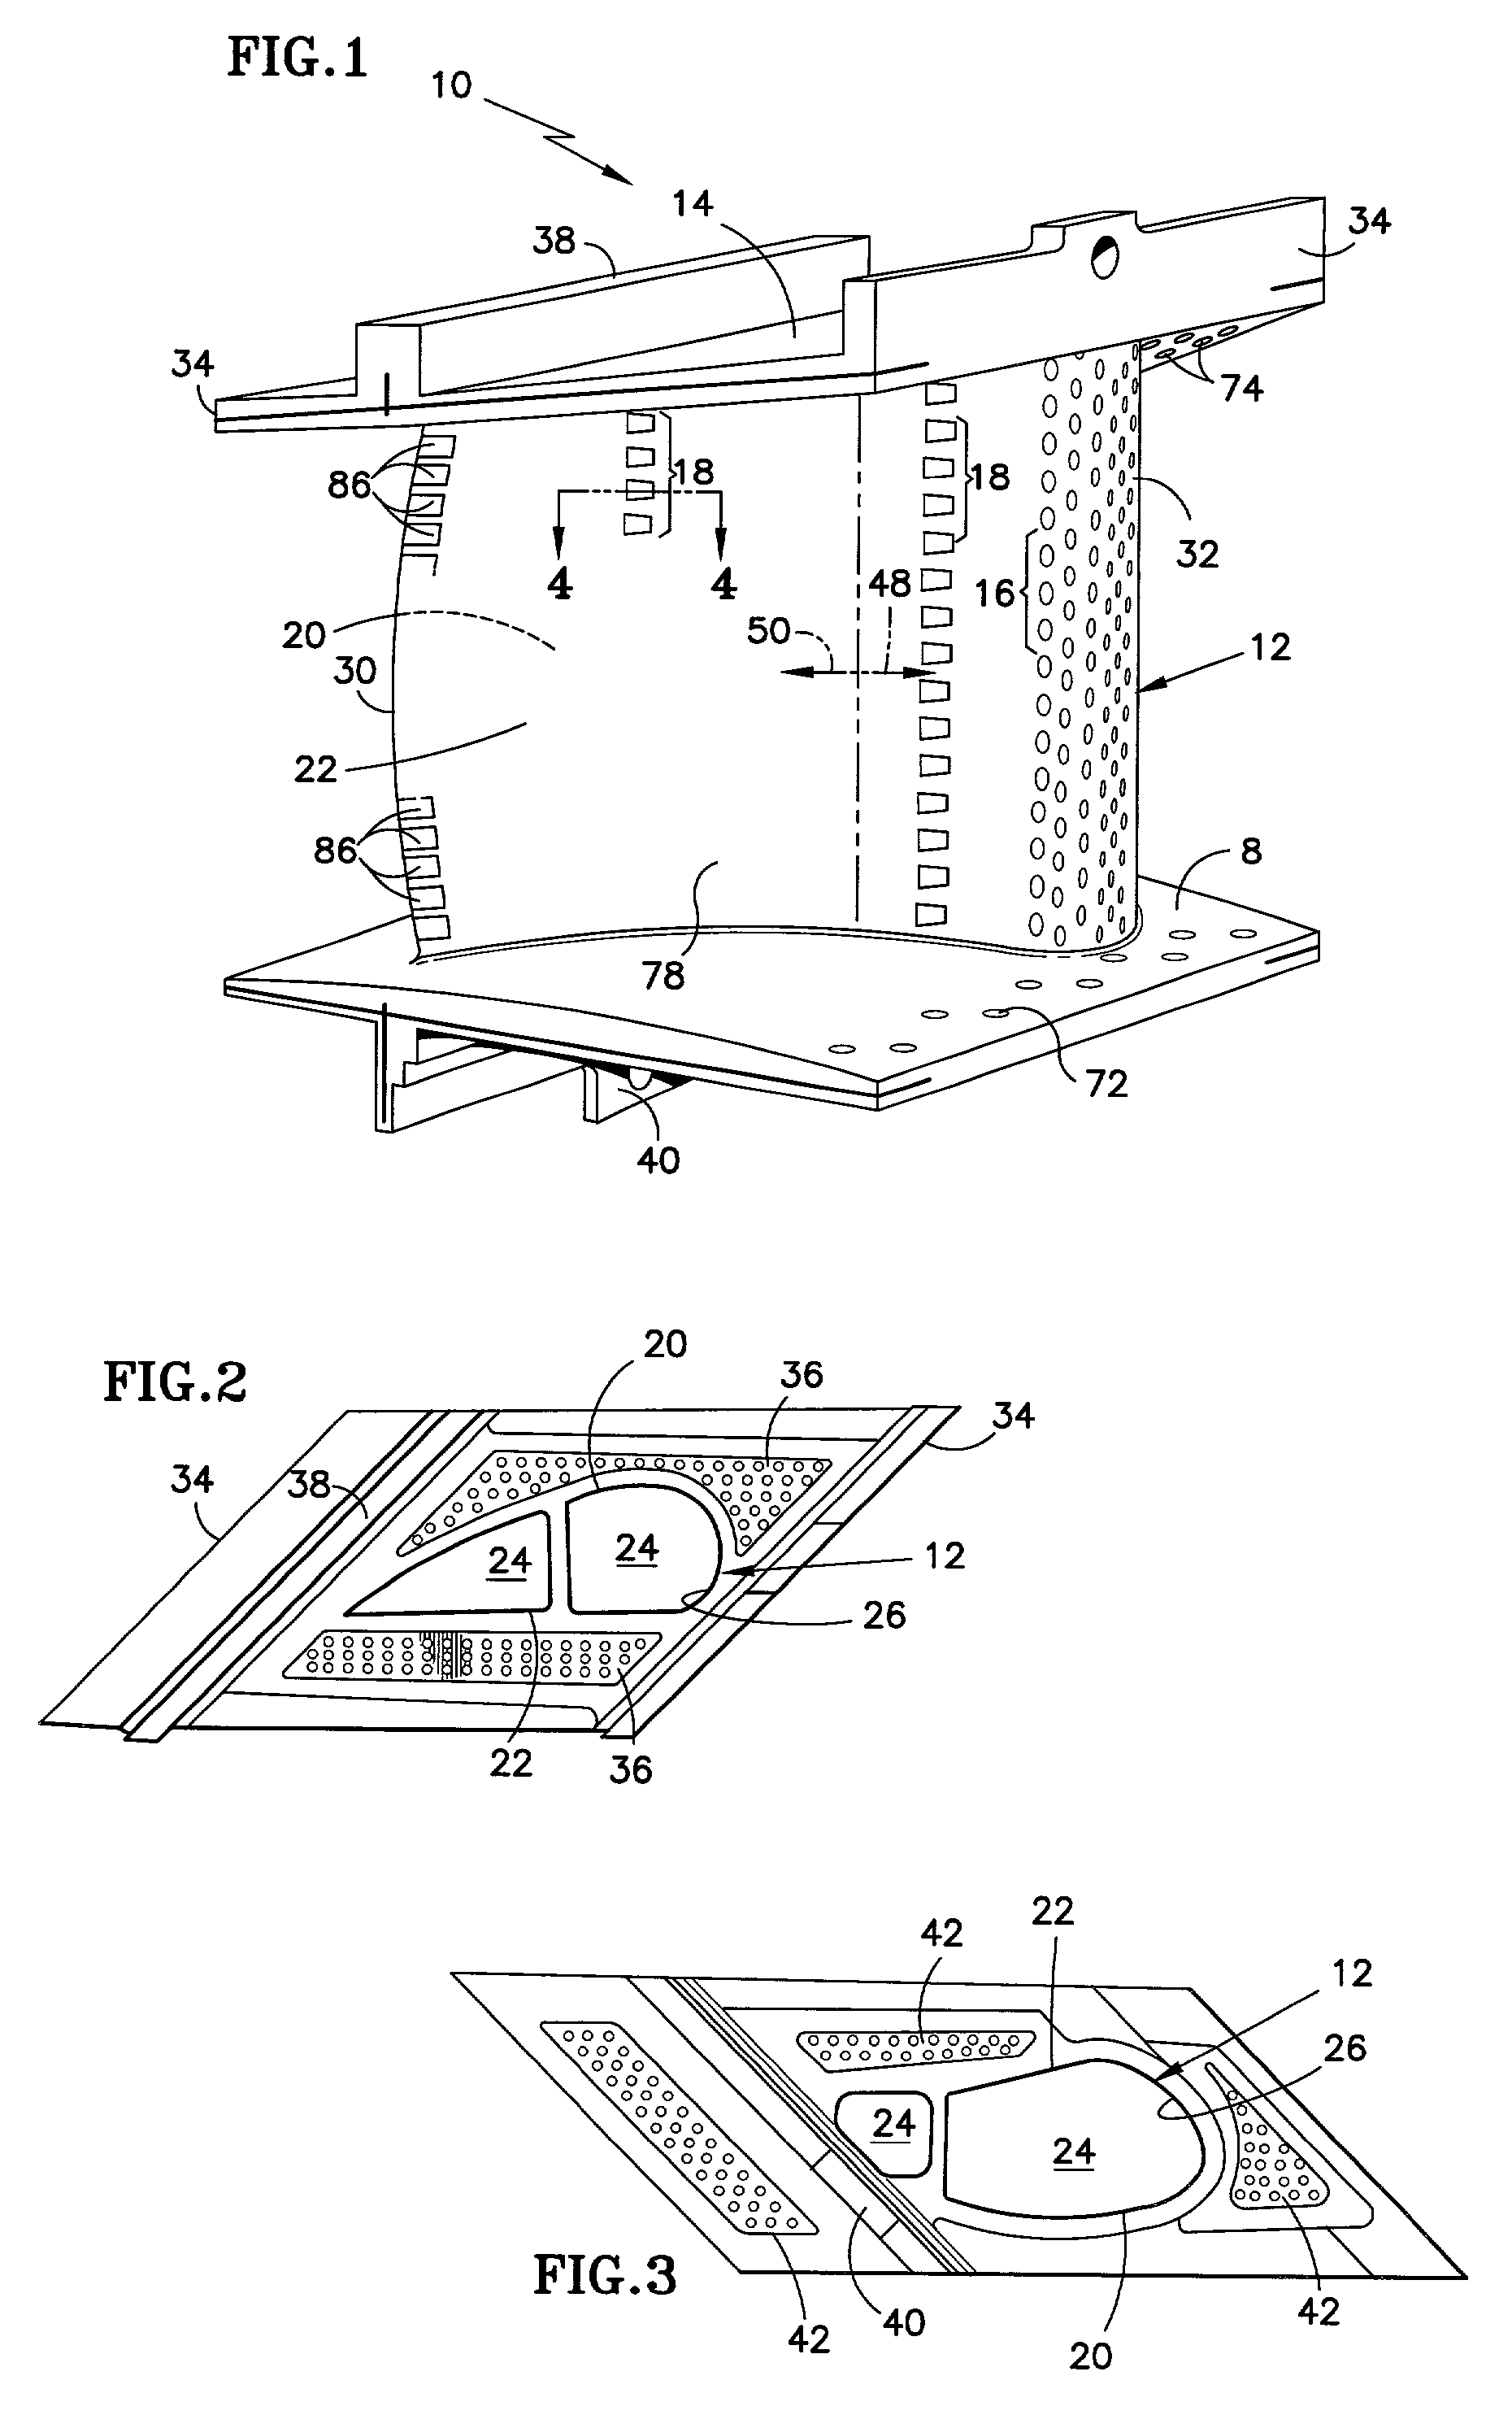 Method for repairing an apertured gas turbine component